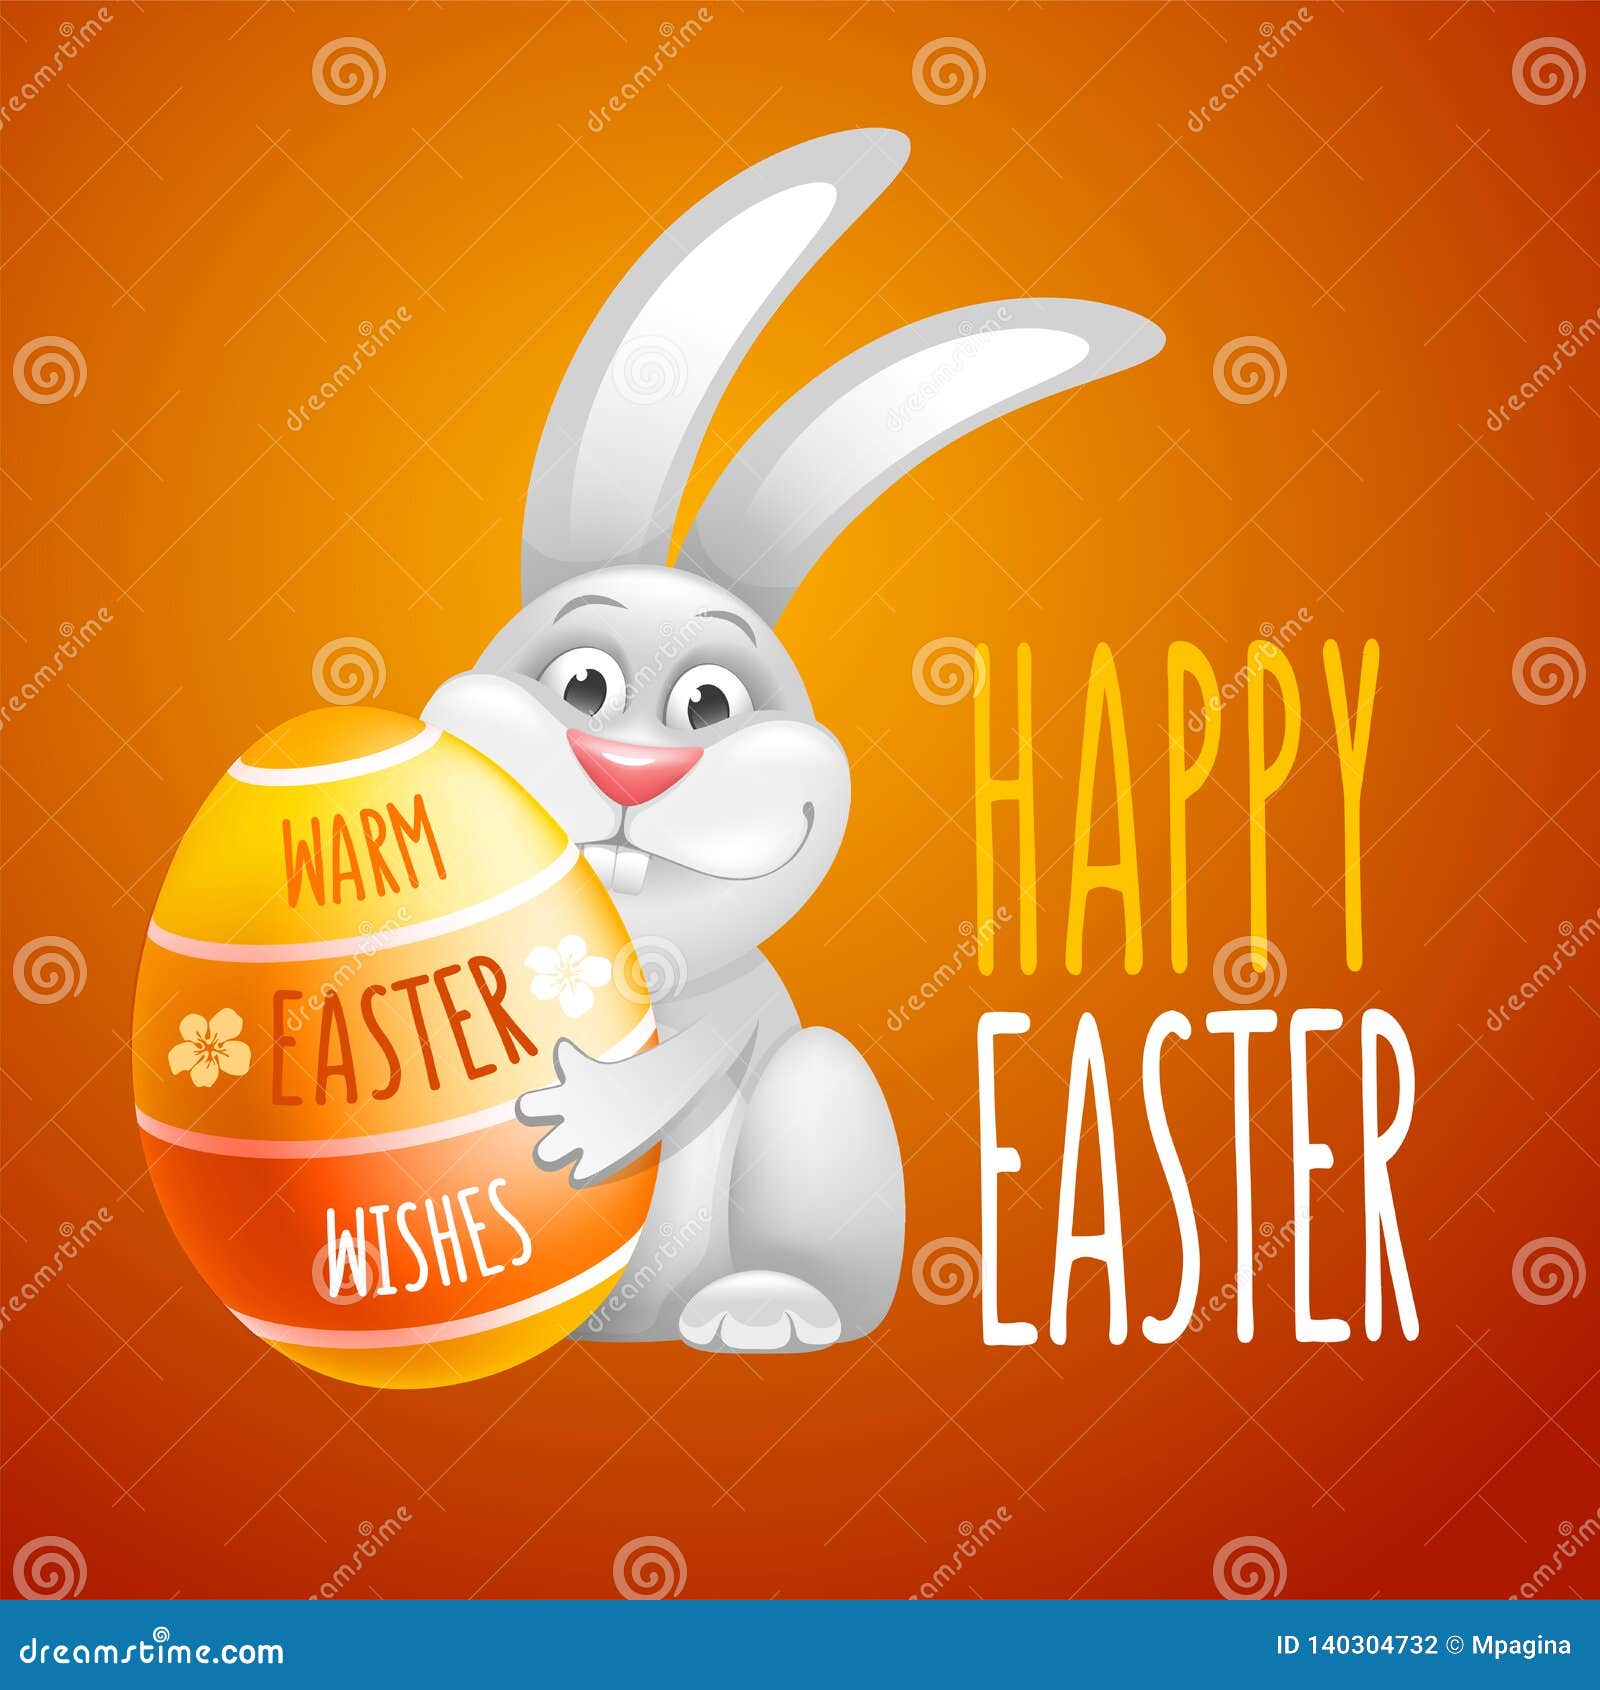 Happy Easter Greeting stock vector. Illustration of greeting - 140304732